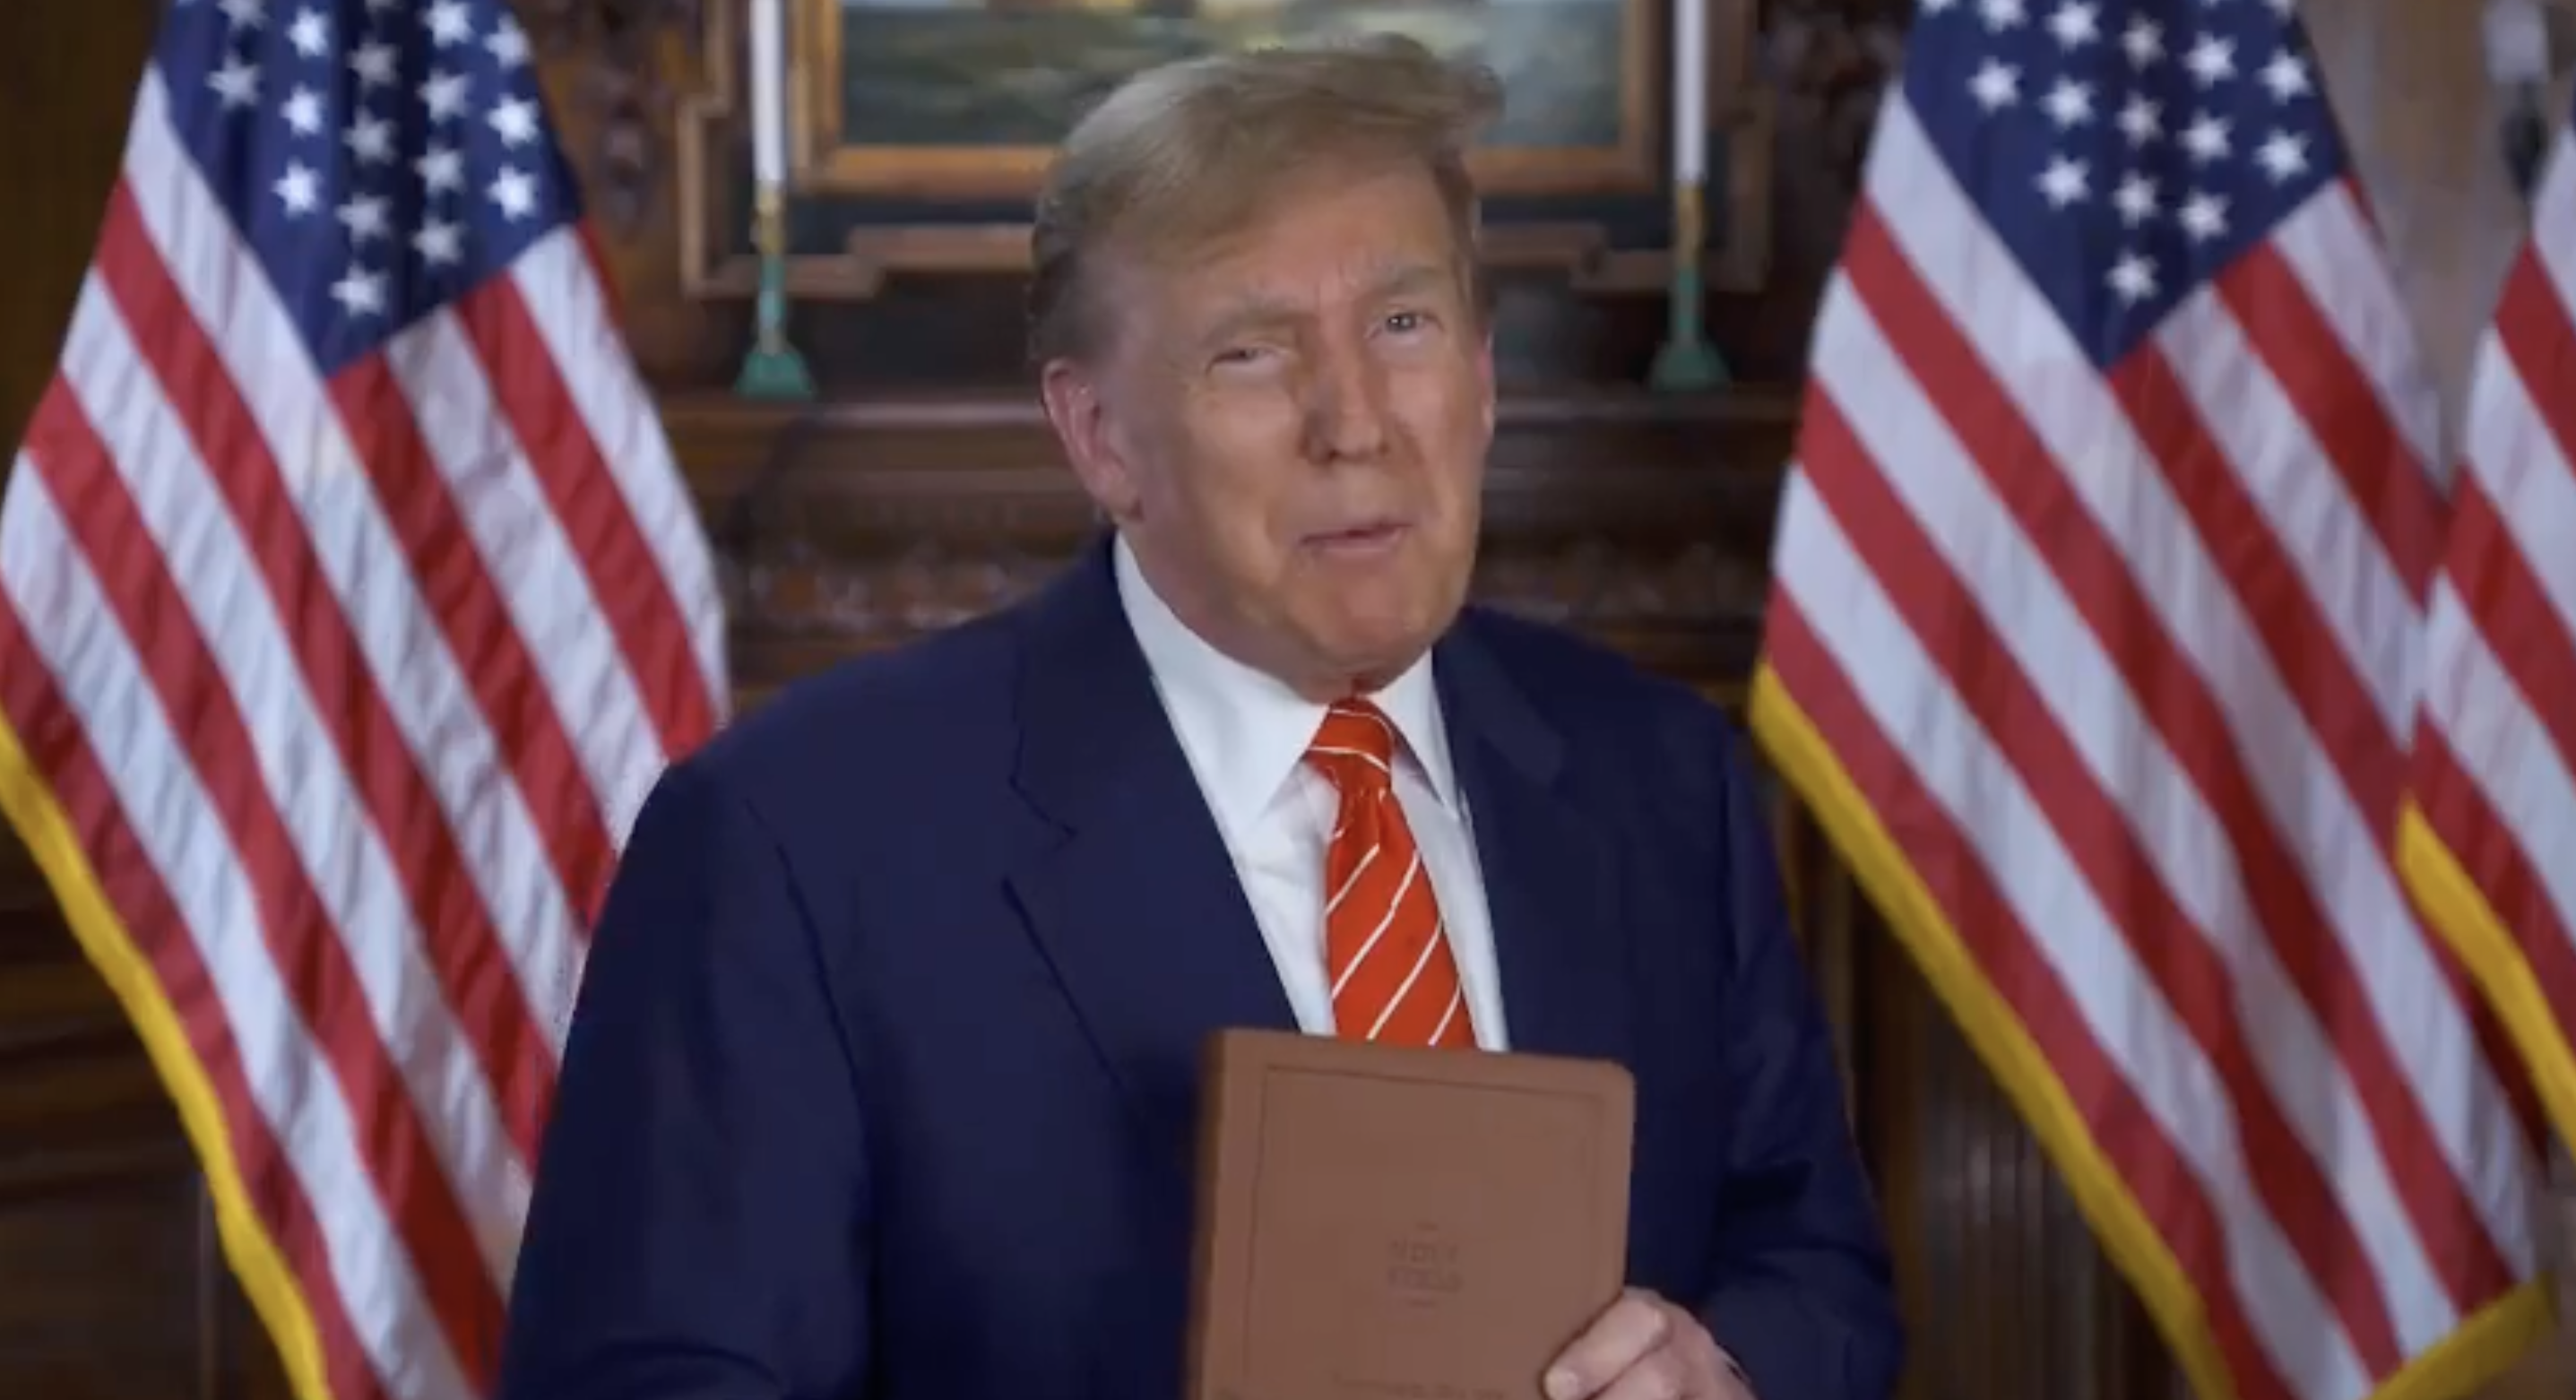 Donald Trump stands with a book, flanked by two US flags, addressing the camera